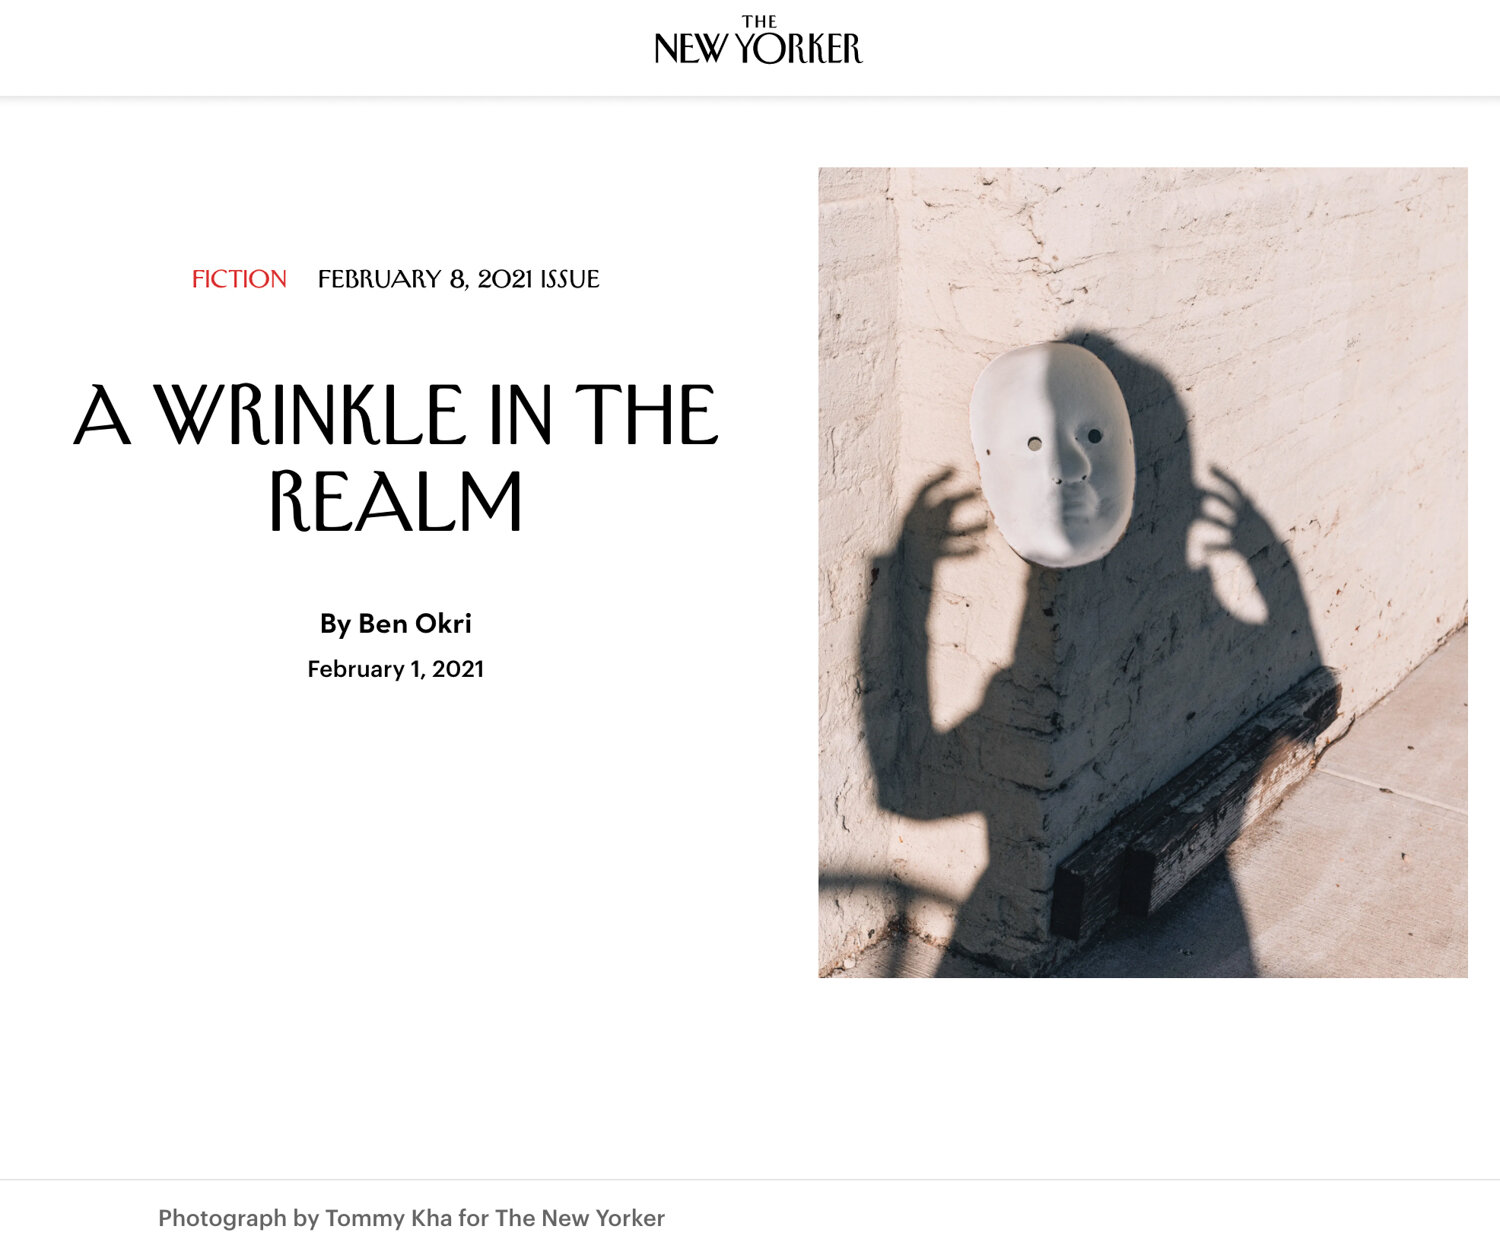 "A Wrinkle in the Realm" by Ben Okri